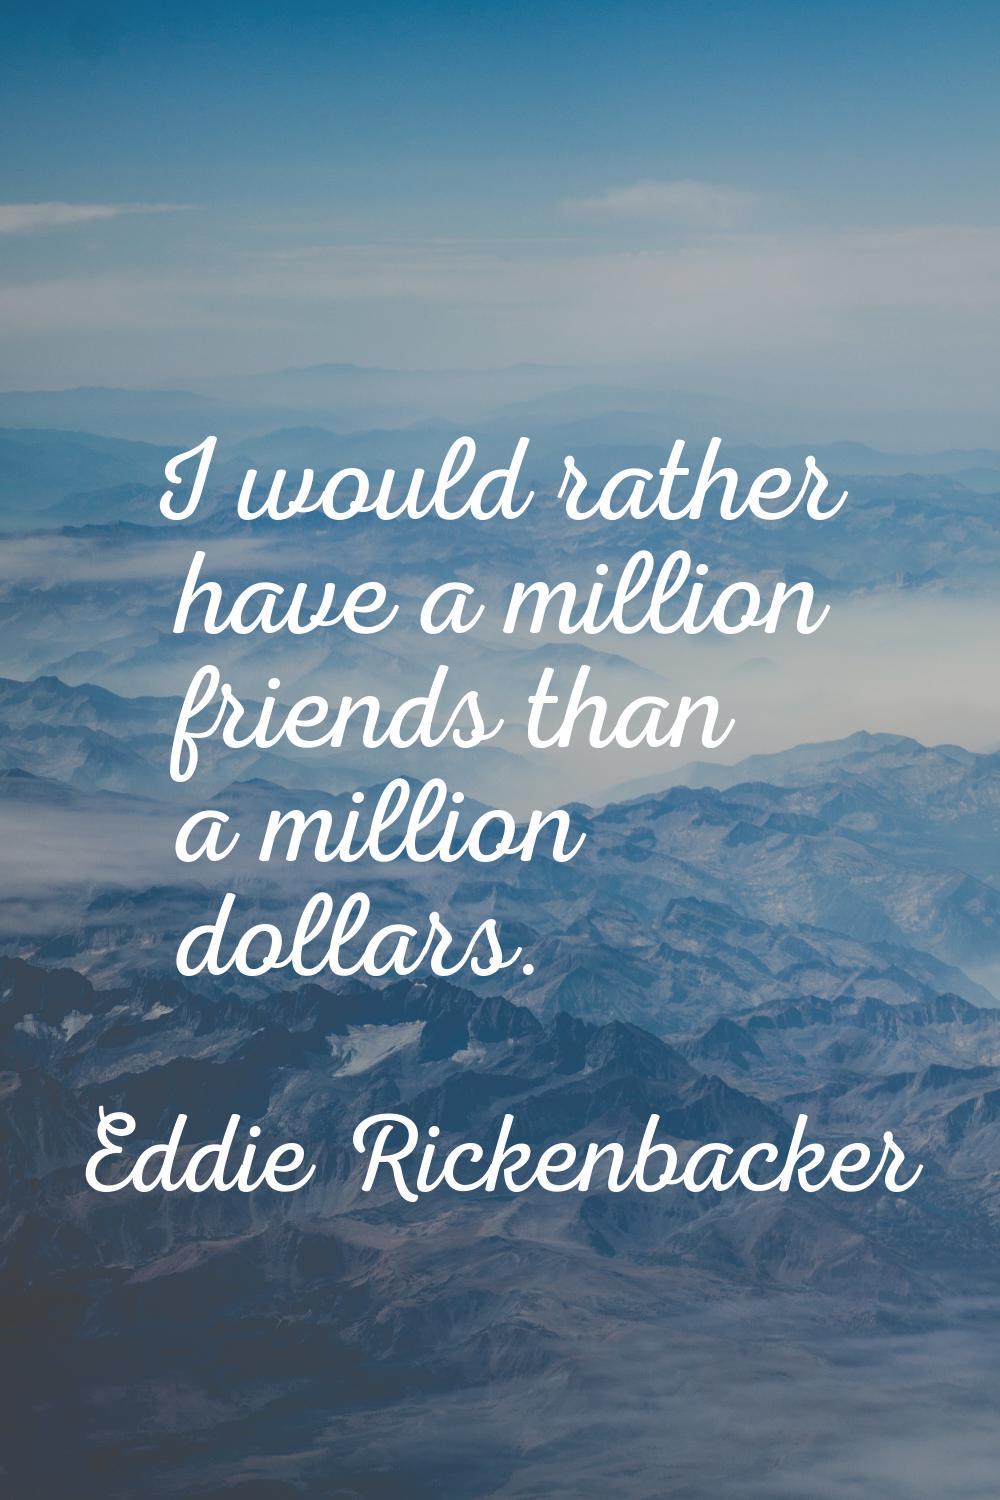 I would rather have a million friends than a million dollars.